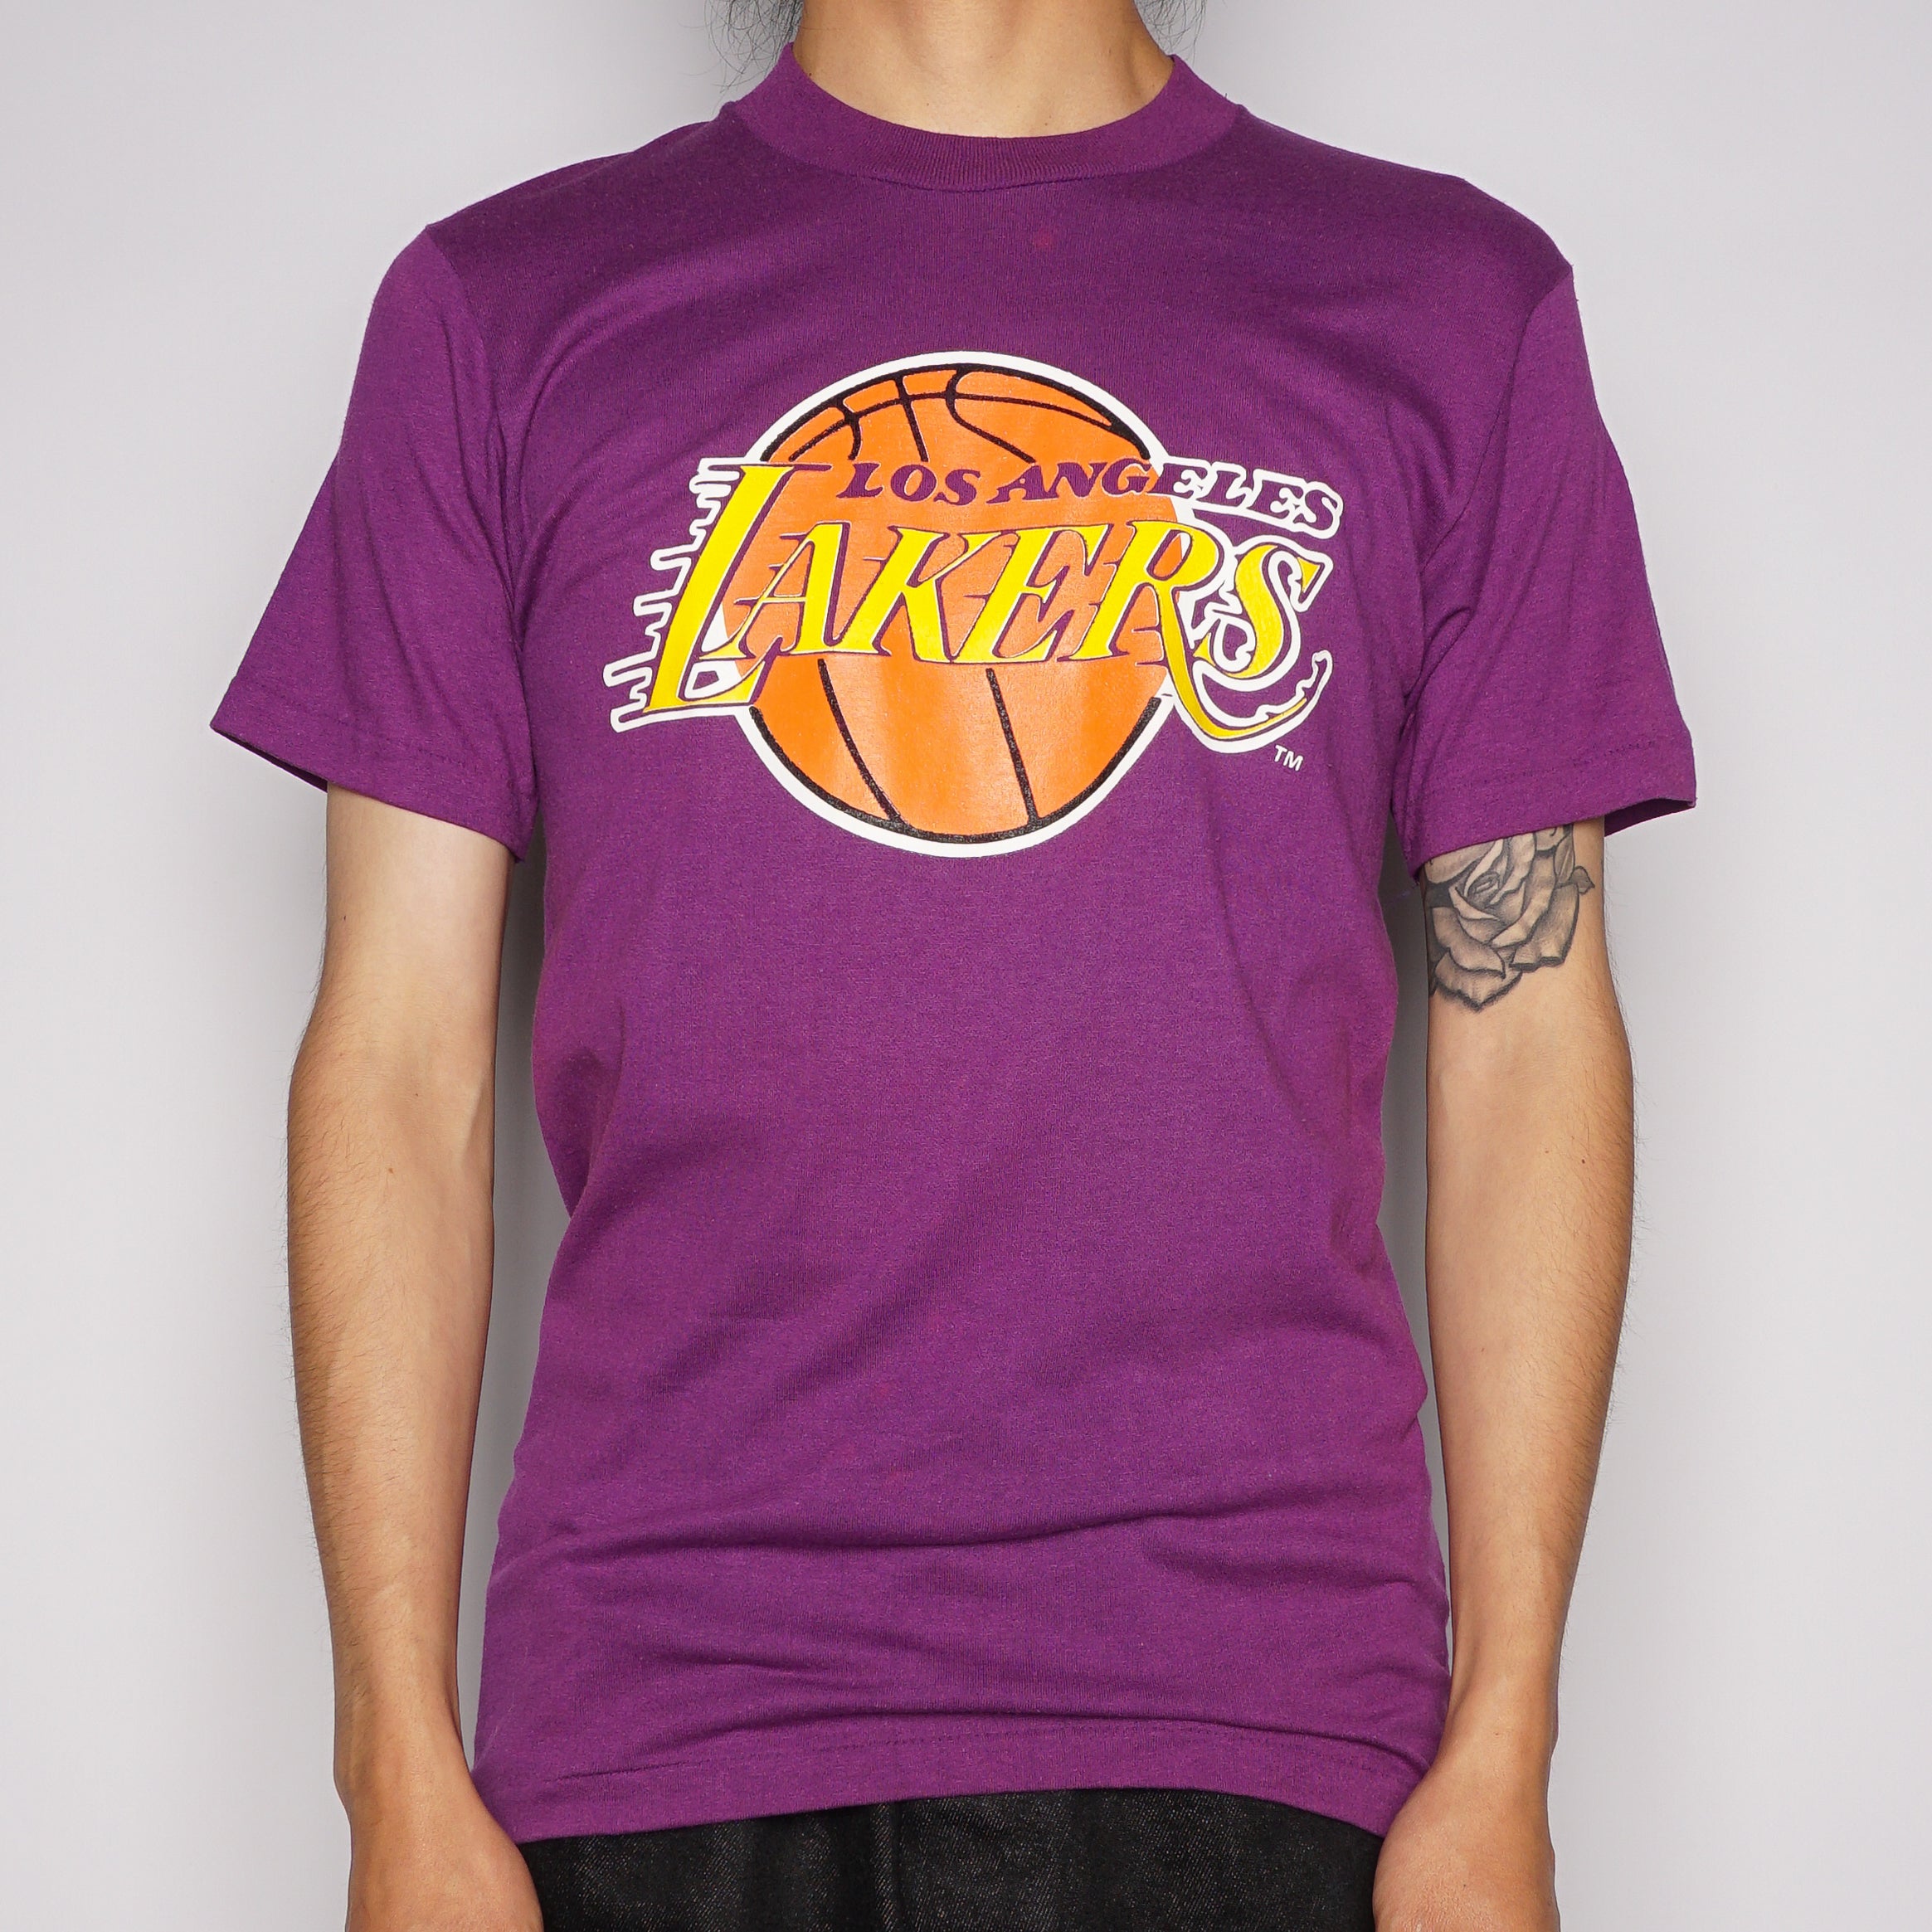 VTG 80s LA LAKERS T-SHIRT – TRIED AND TRUE CO.